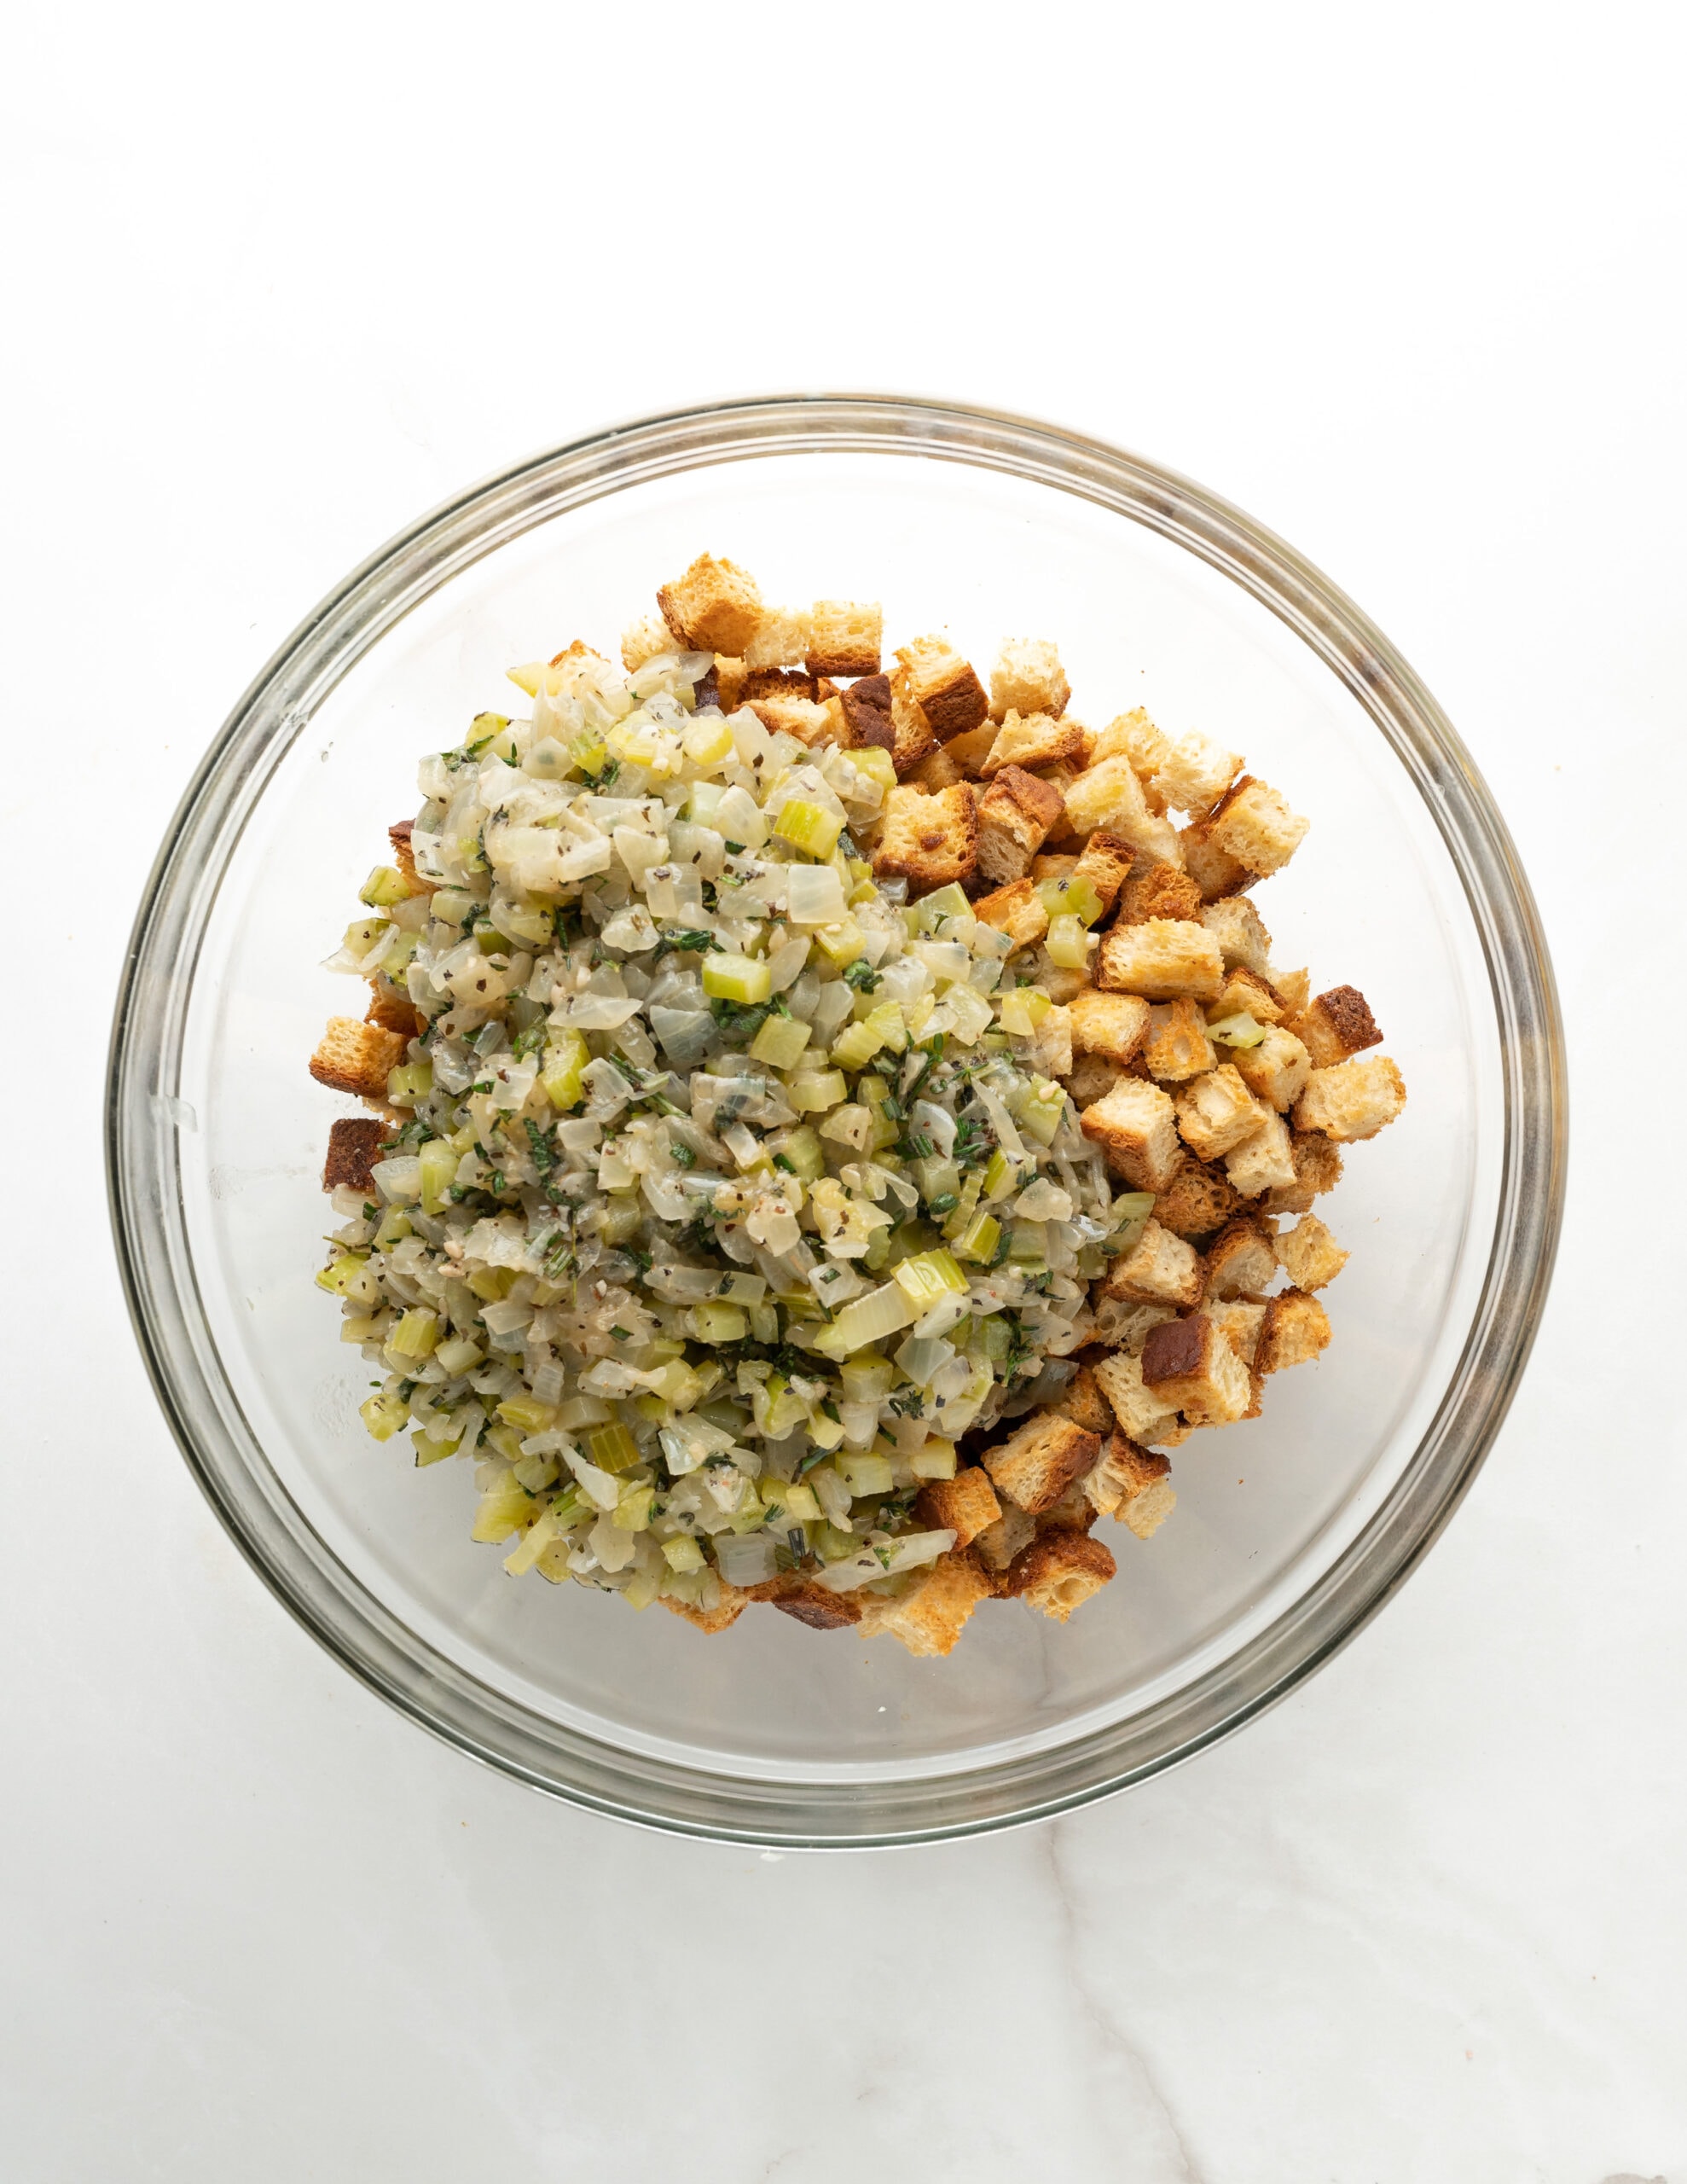 A large clear both with toasted gluten-free bread cubes, and onion/celery mixture. 